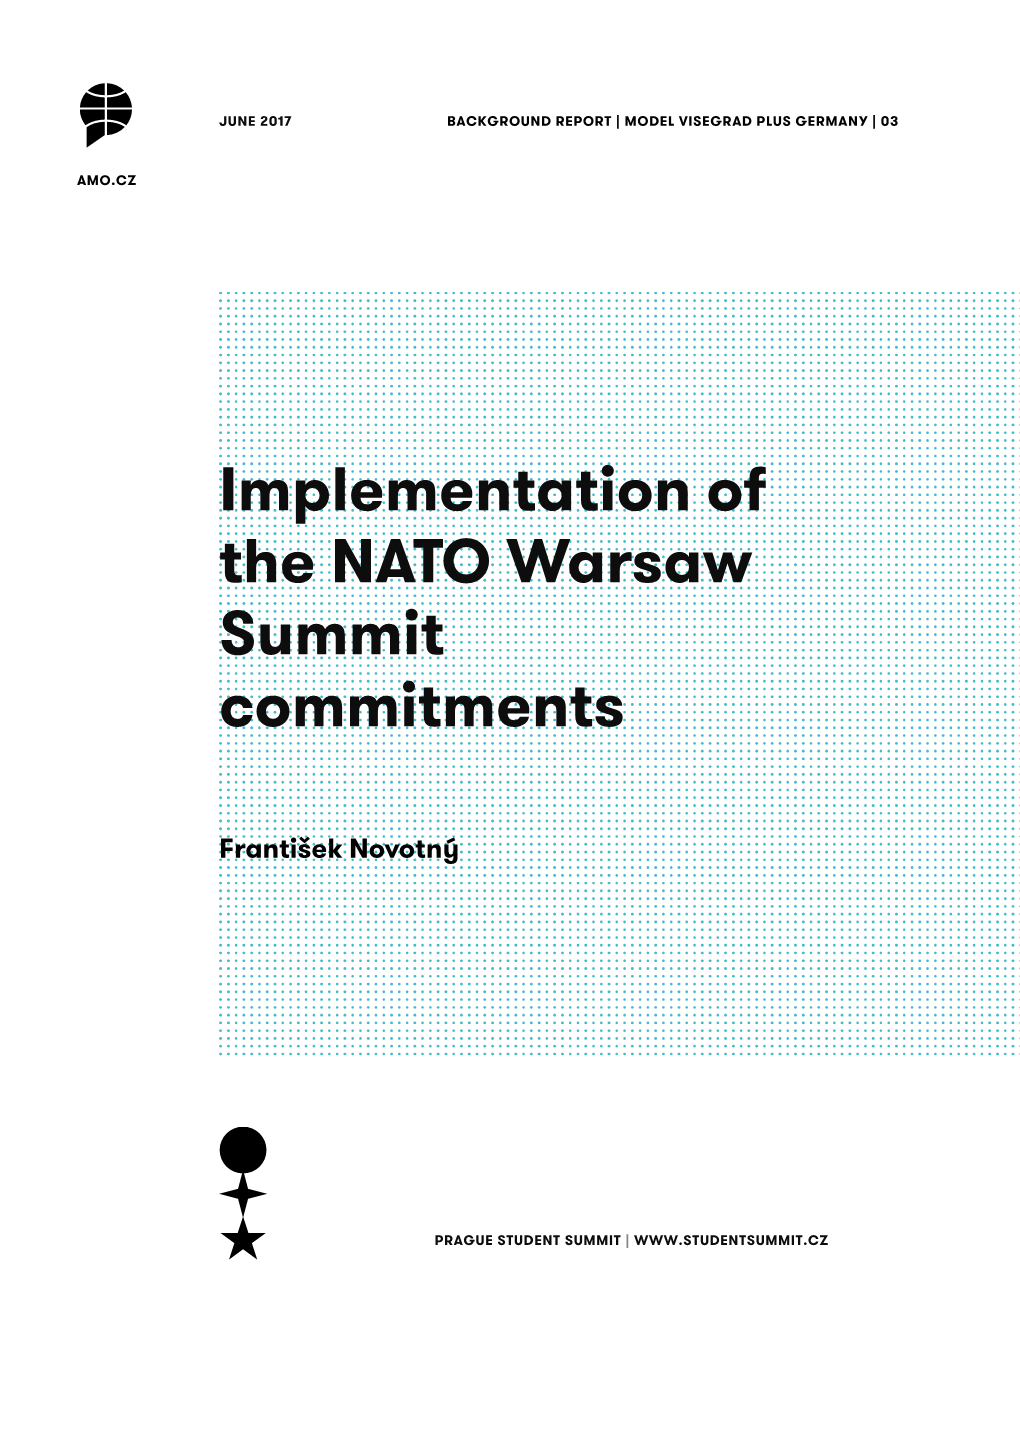 Implementation of the NATO Warsaw Summit Commitments